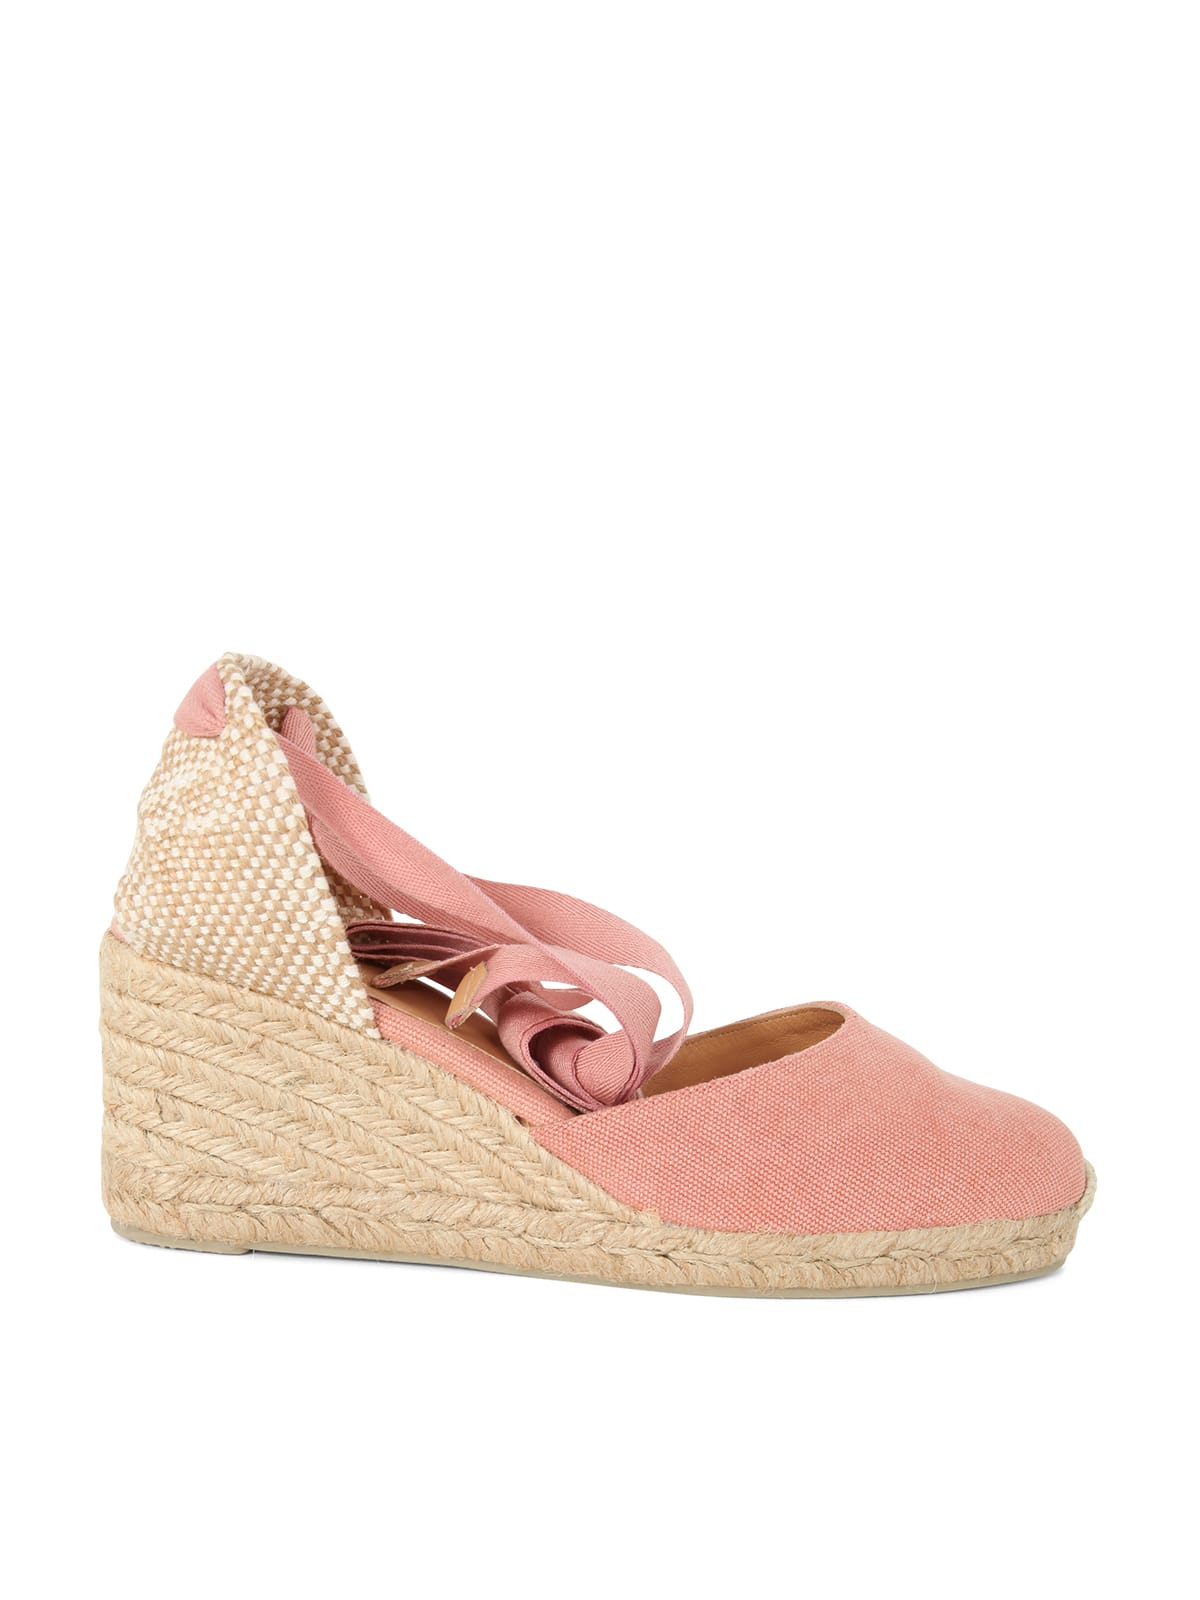 Castañer Carina Espadrilles Wedge Sandal With Ankle Laces